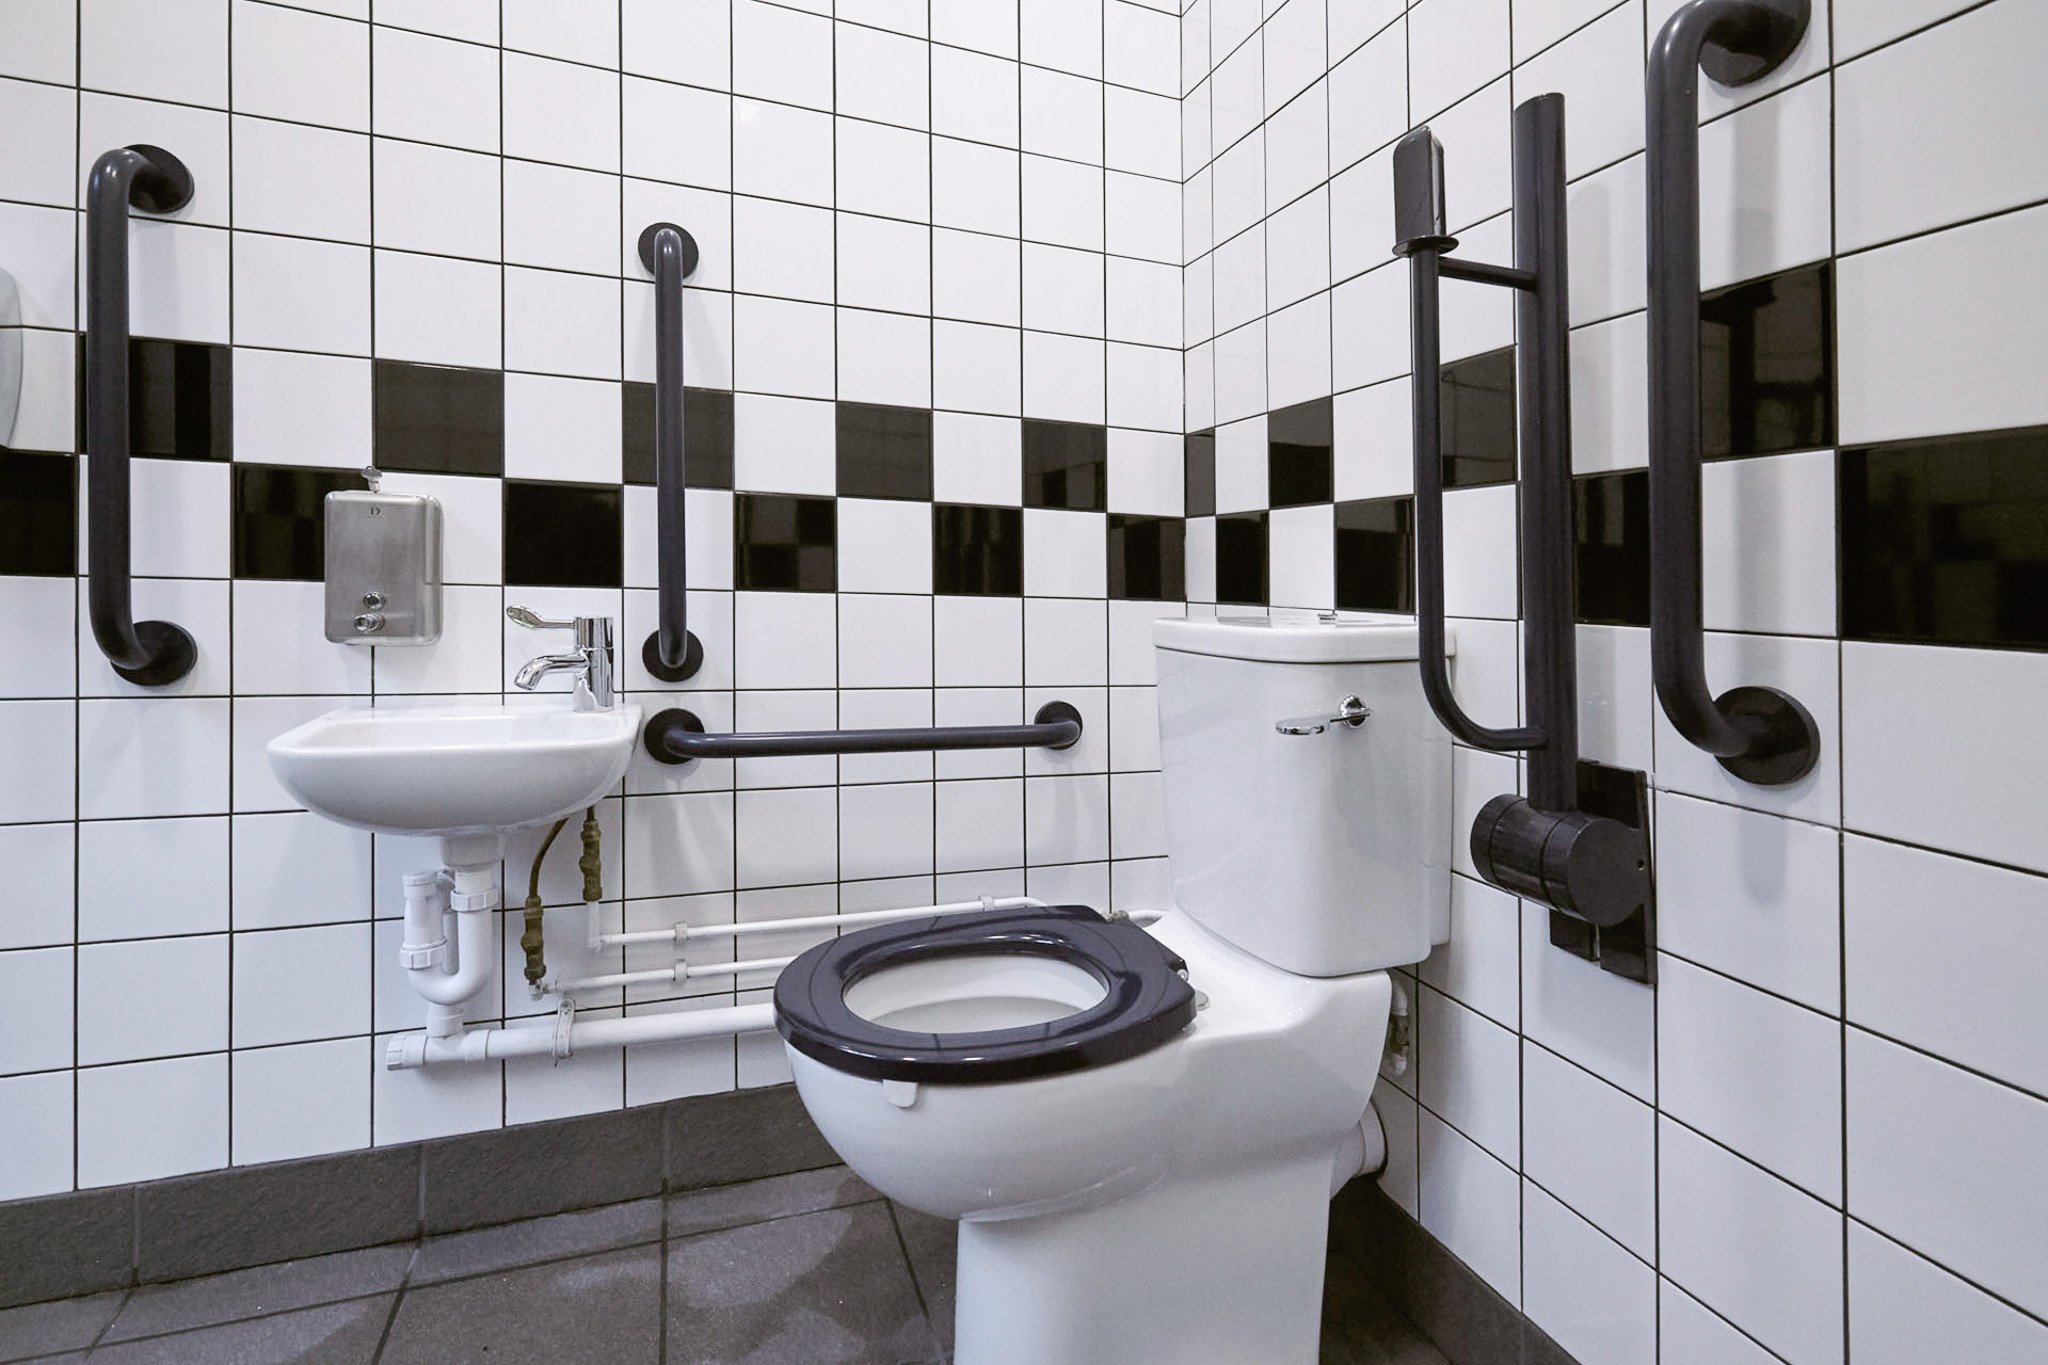 disabled doc m toilet at coventry bus station with black and white feature tiling.jpg